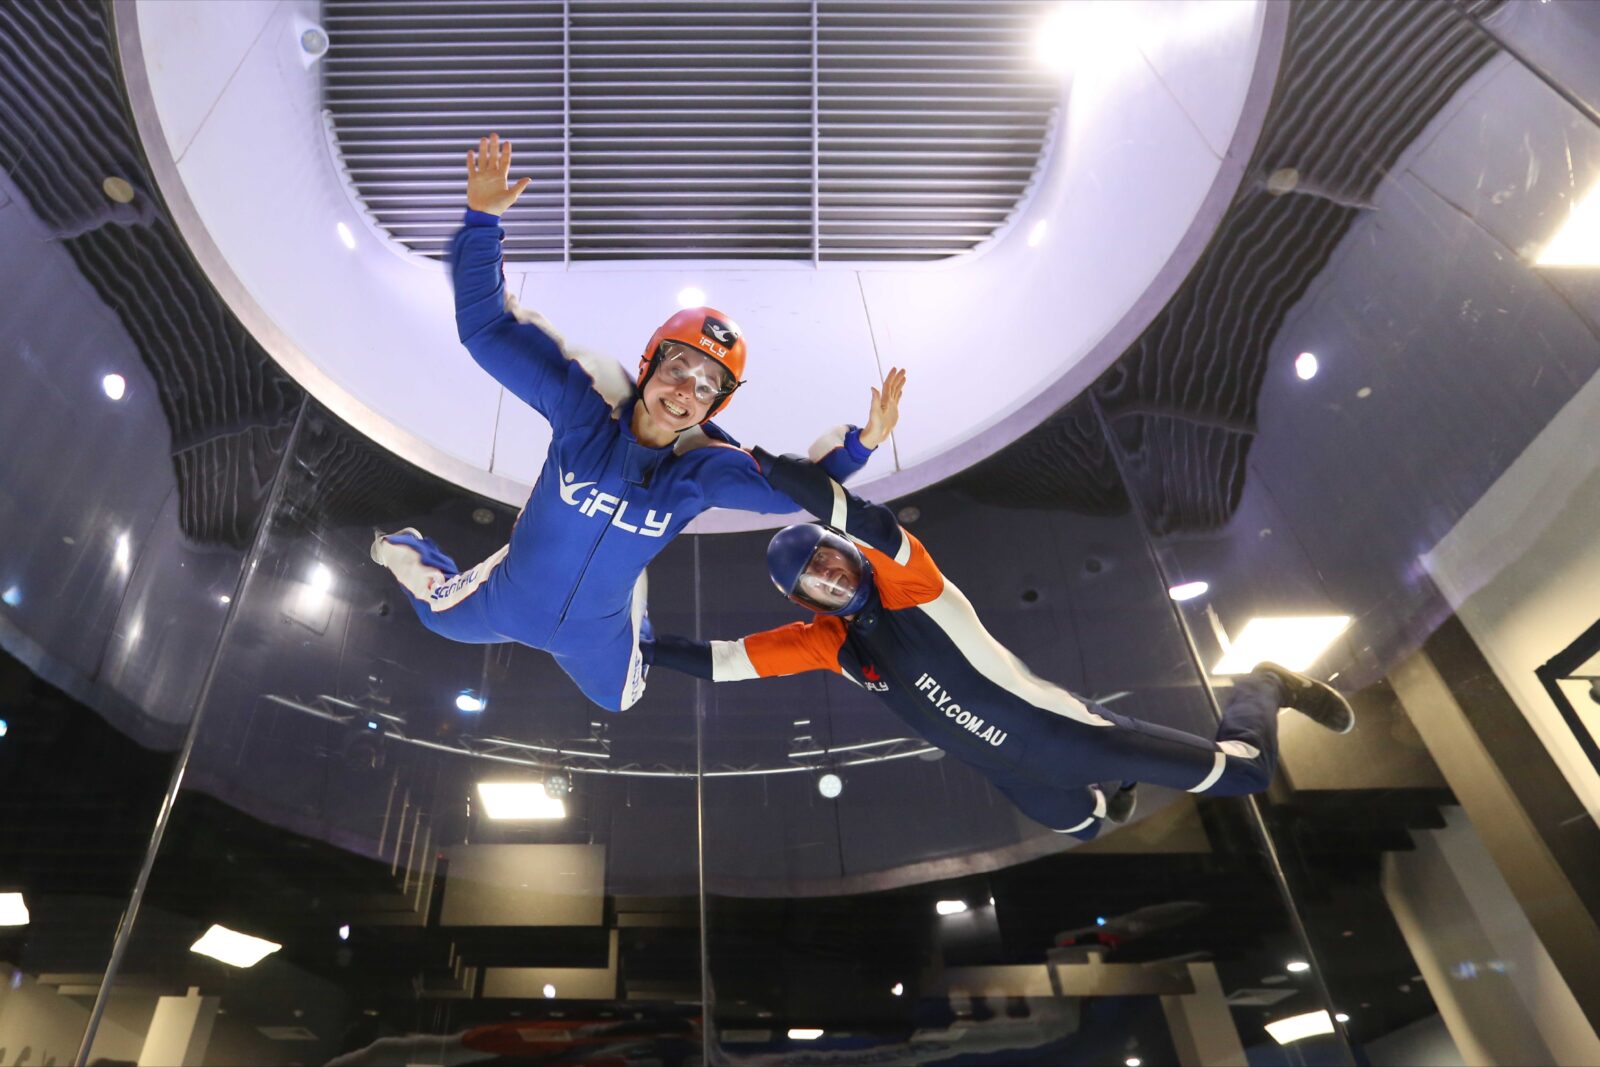 iFLY High - fly towards the top of the tunnel for the ultimate adrenaline rush